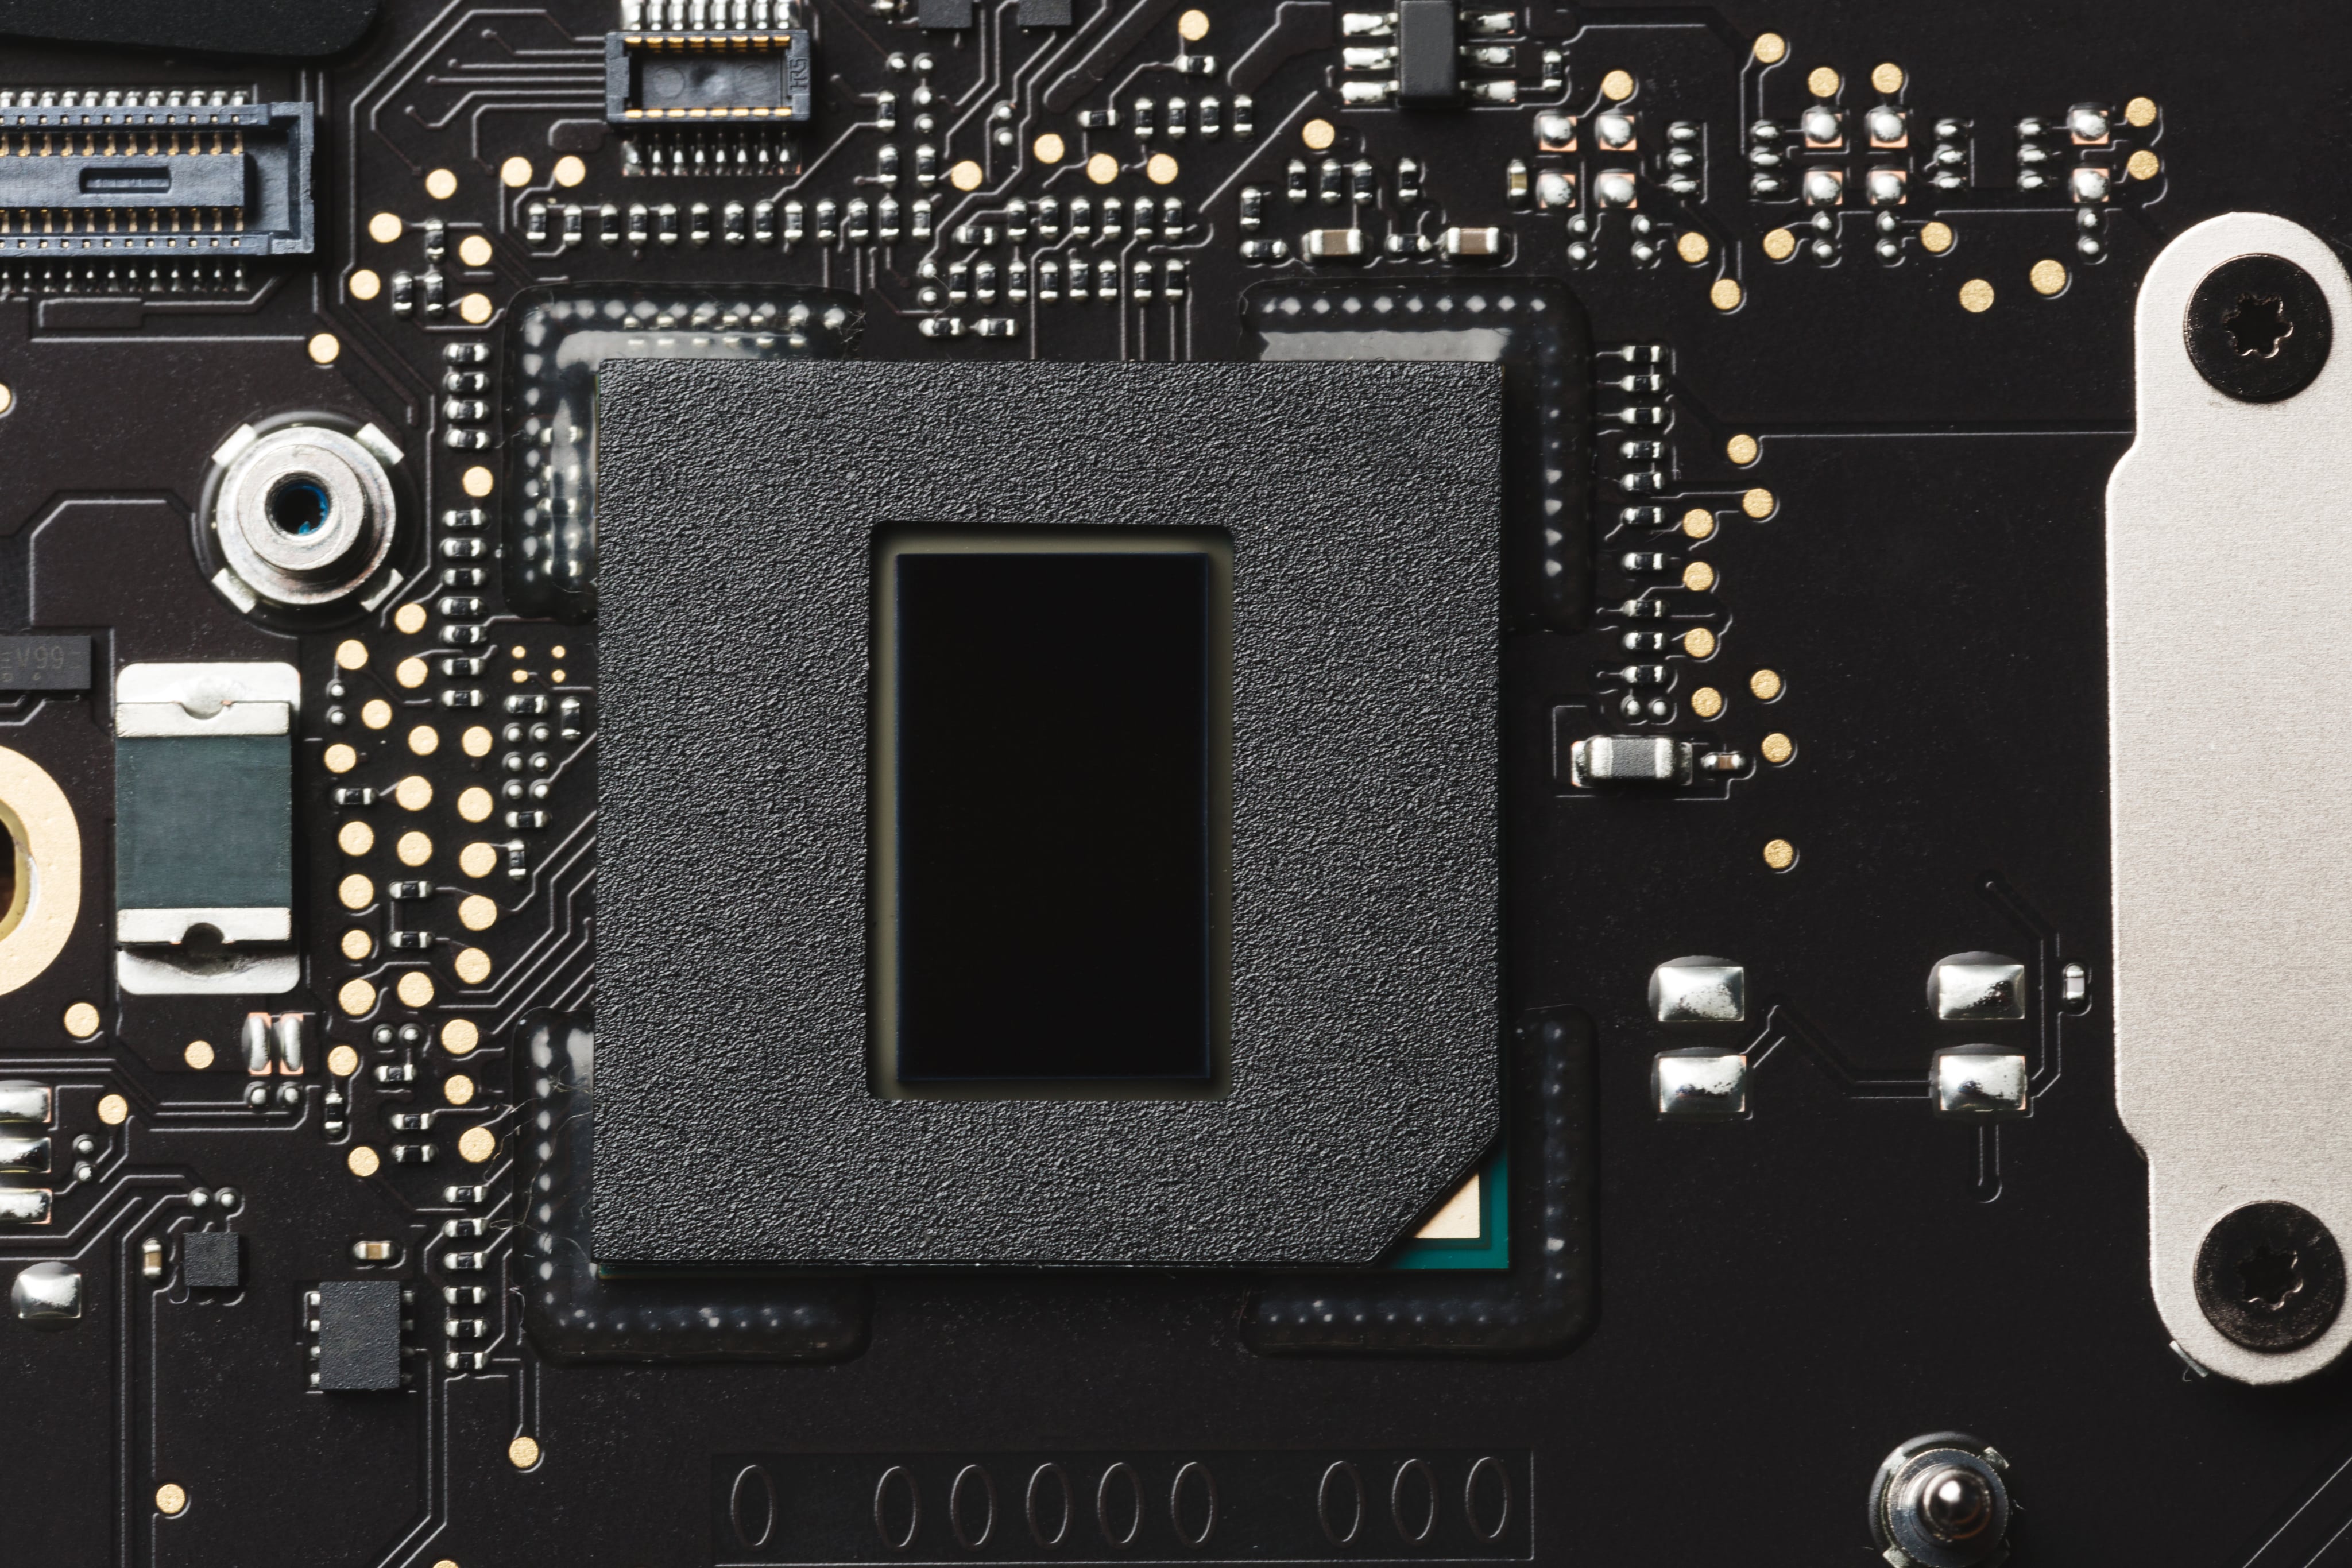 A close-up of a microprocessor on a motherboard, the central processing unit that powers a computer.